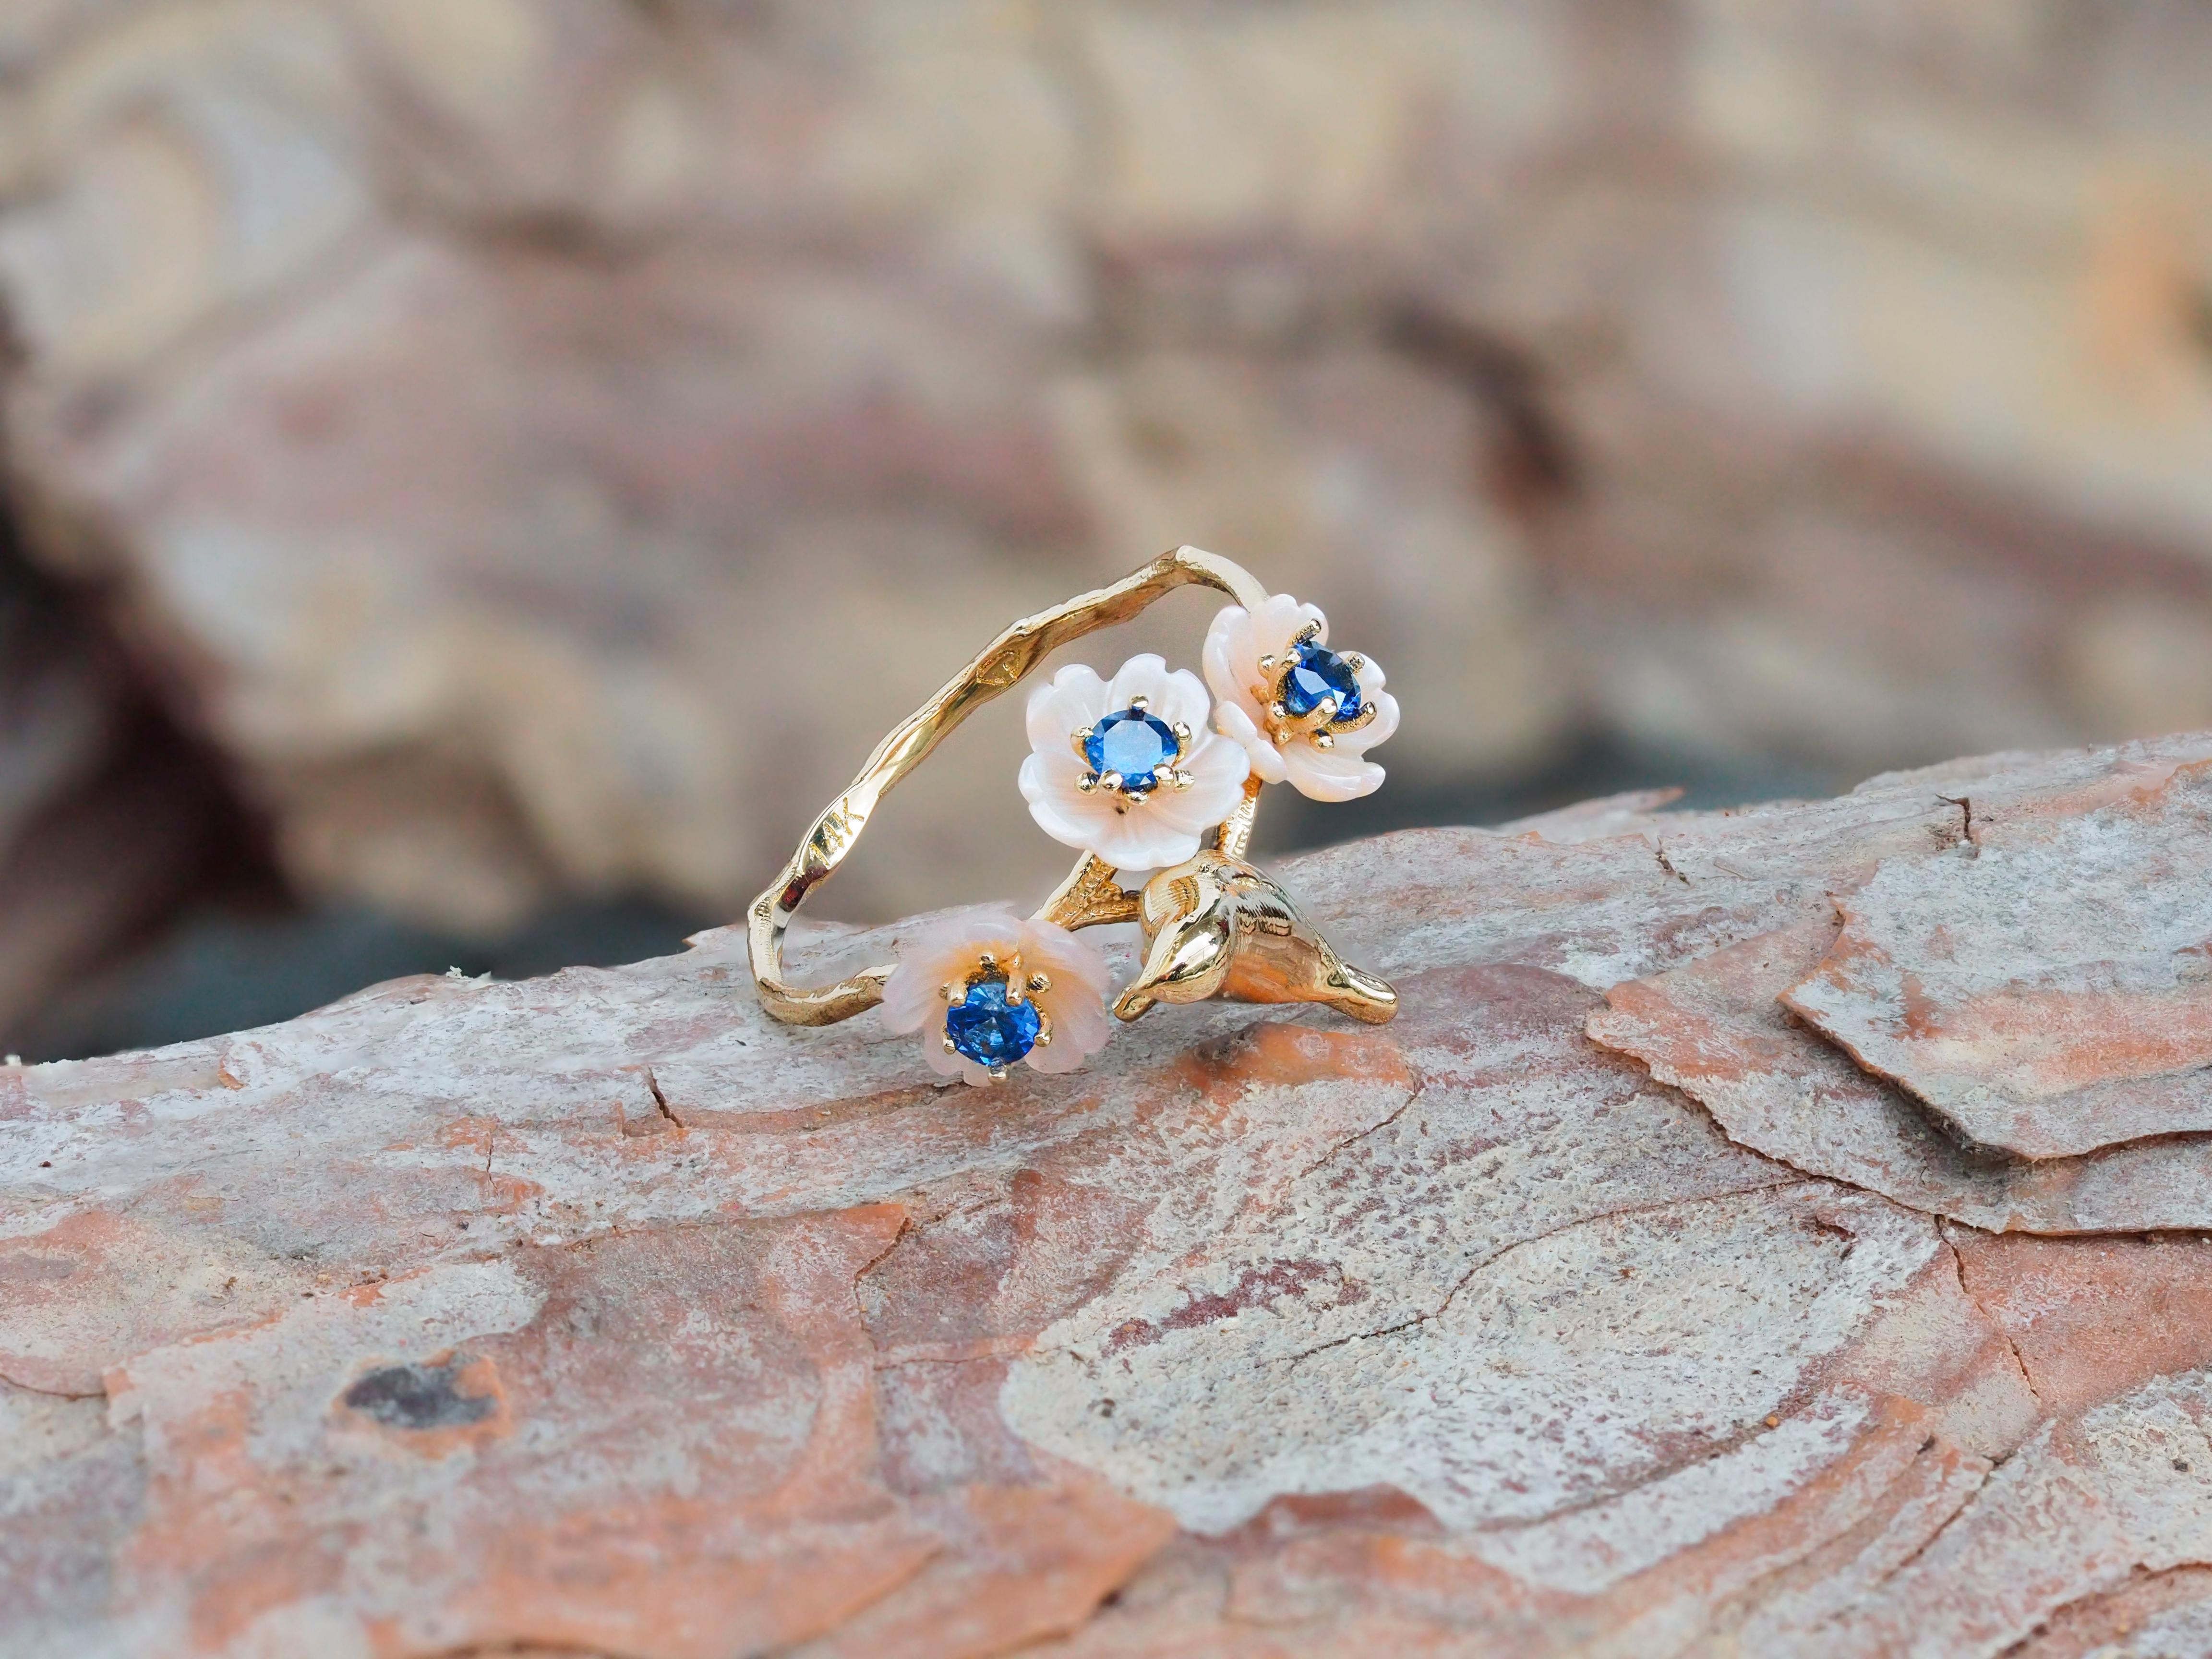 For Sale:  14k Gold Bird on Branch Ring. Sapphires and Carved Mother of Pearl ring! 10